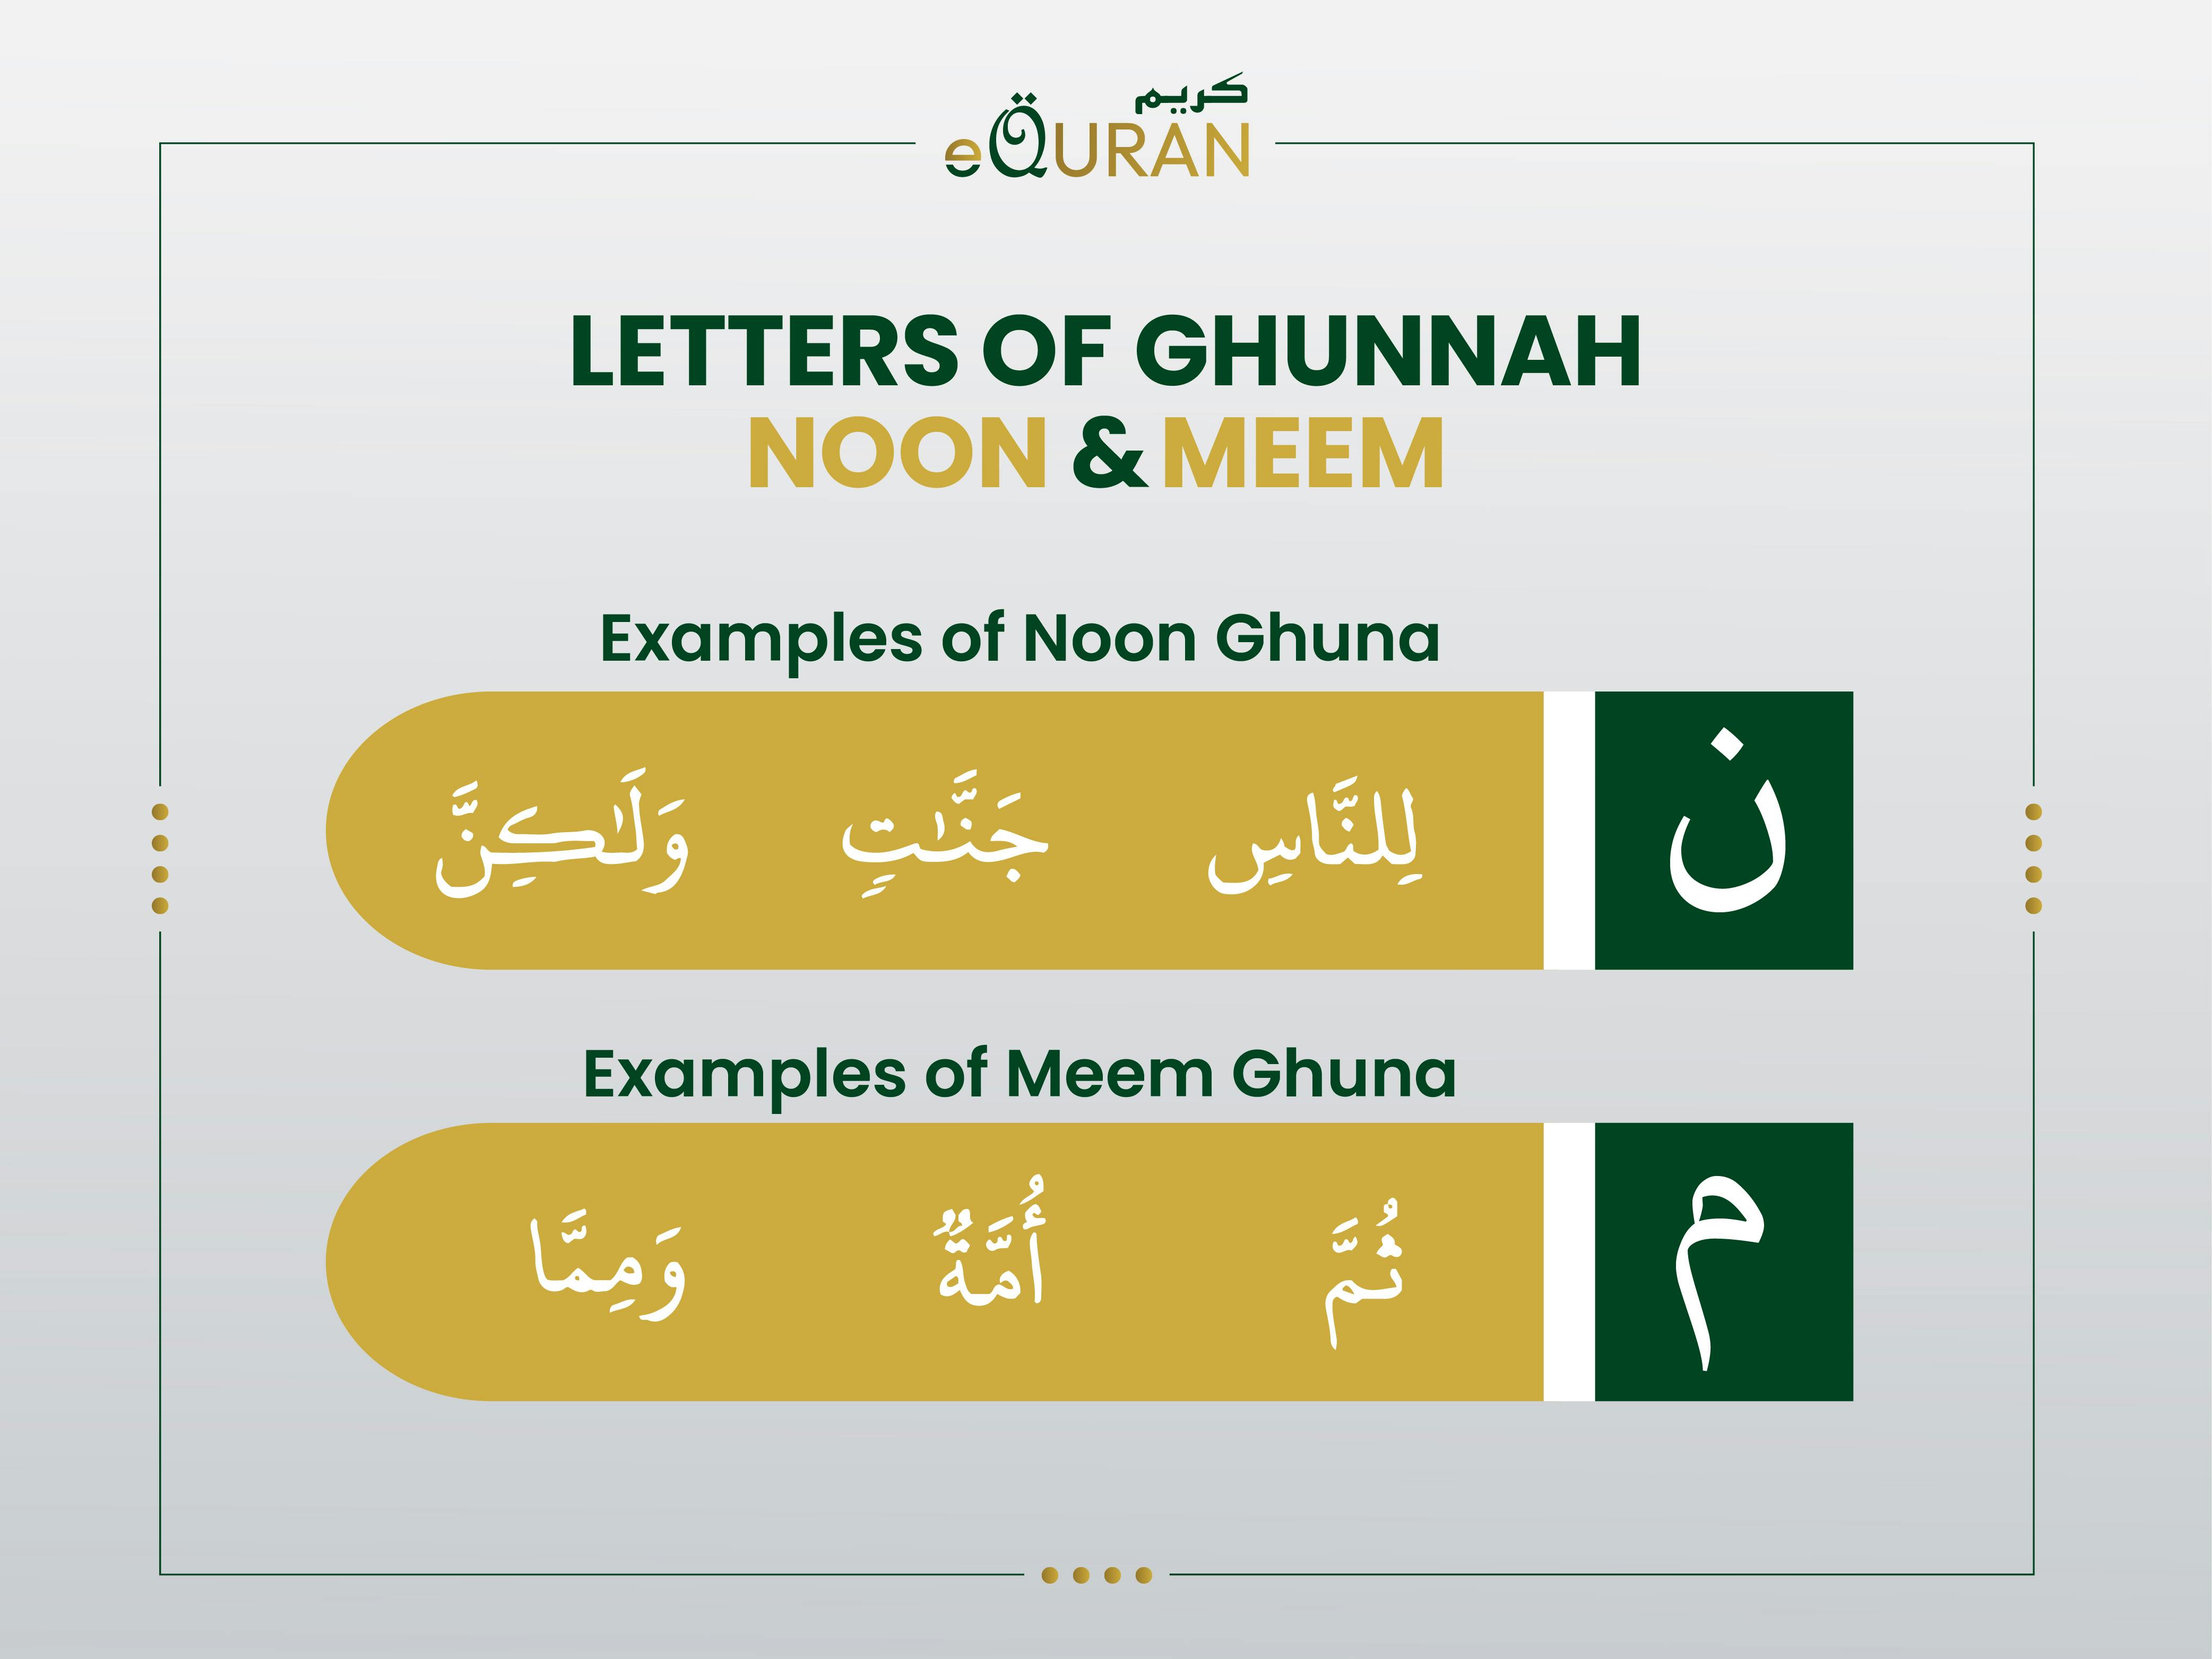 Letters of Ghunnah with sound of some specific Arabic letters